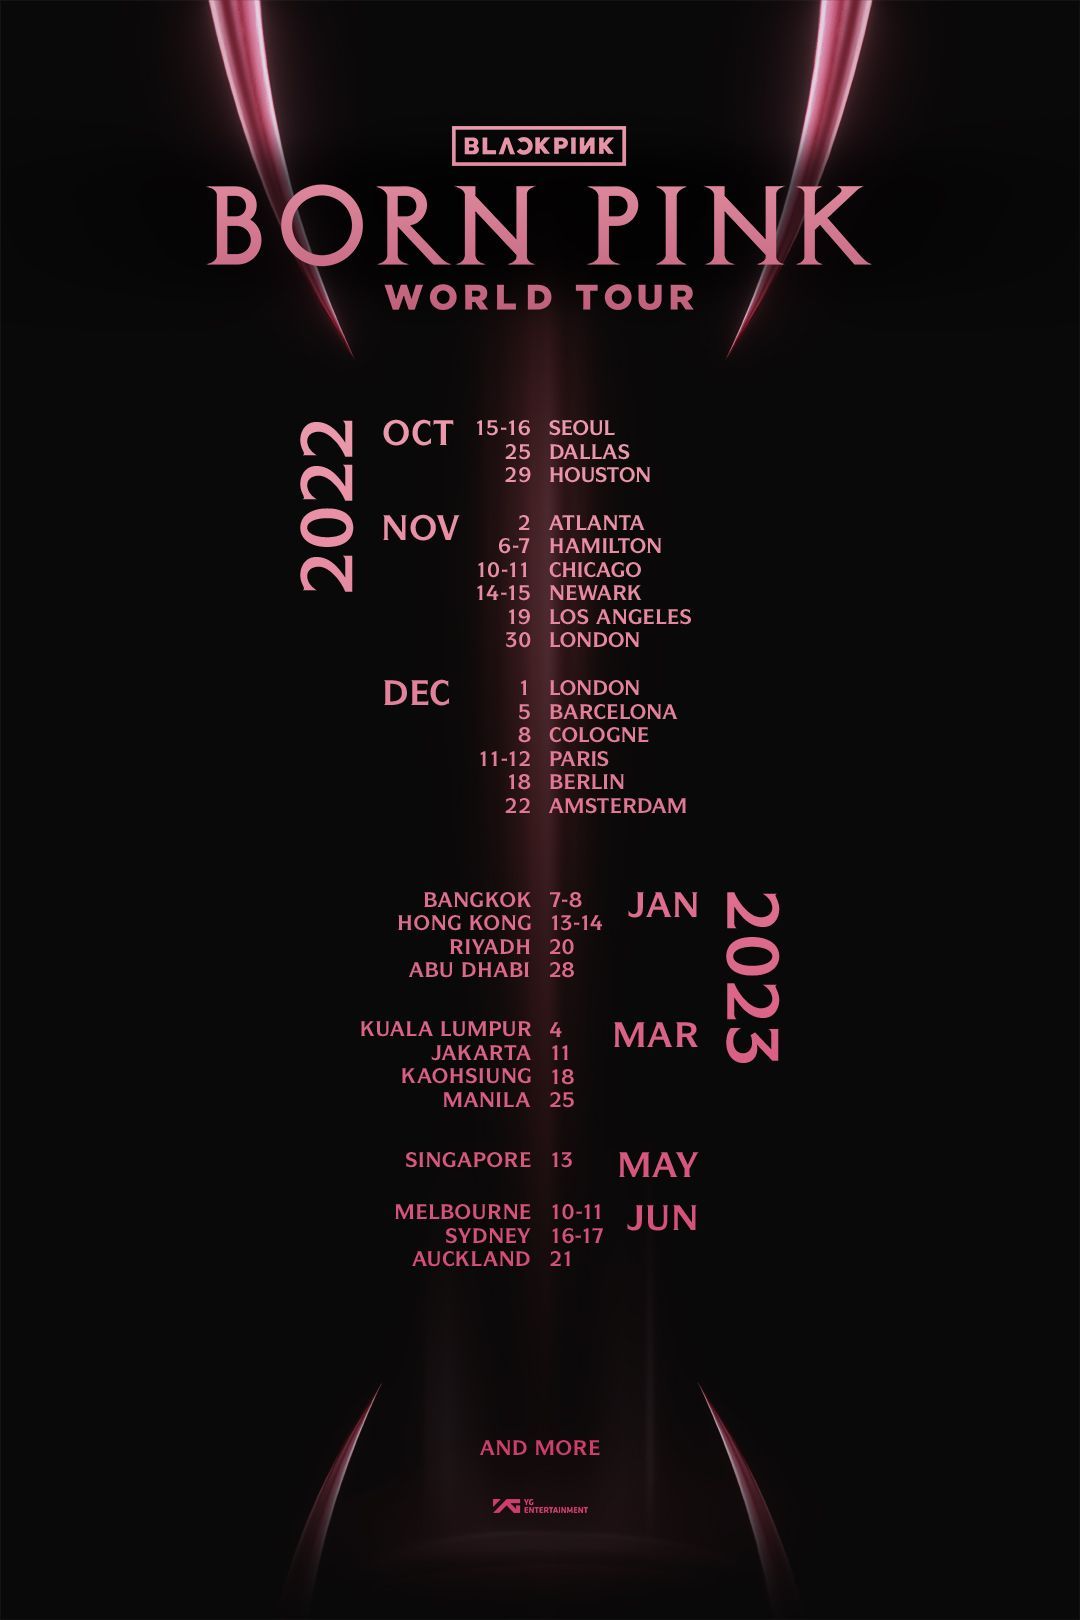 A promotional poster for Blackpink’s new world tour “Born Pink” (YG Entertainment)